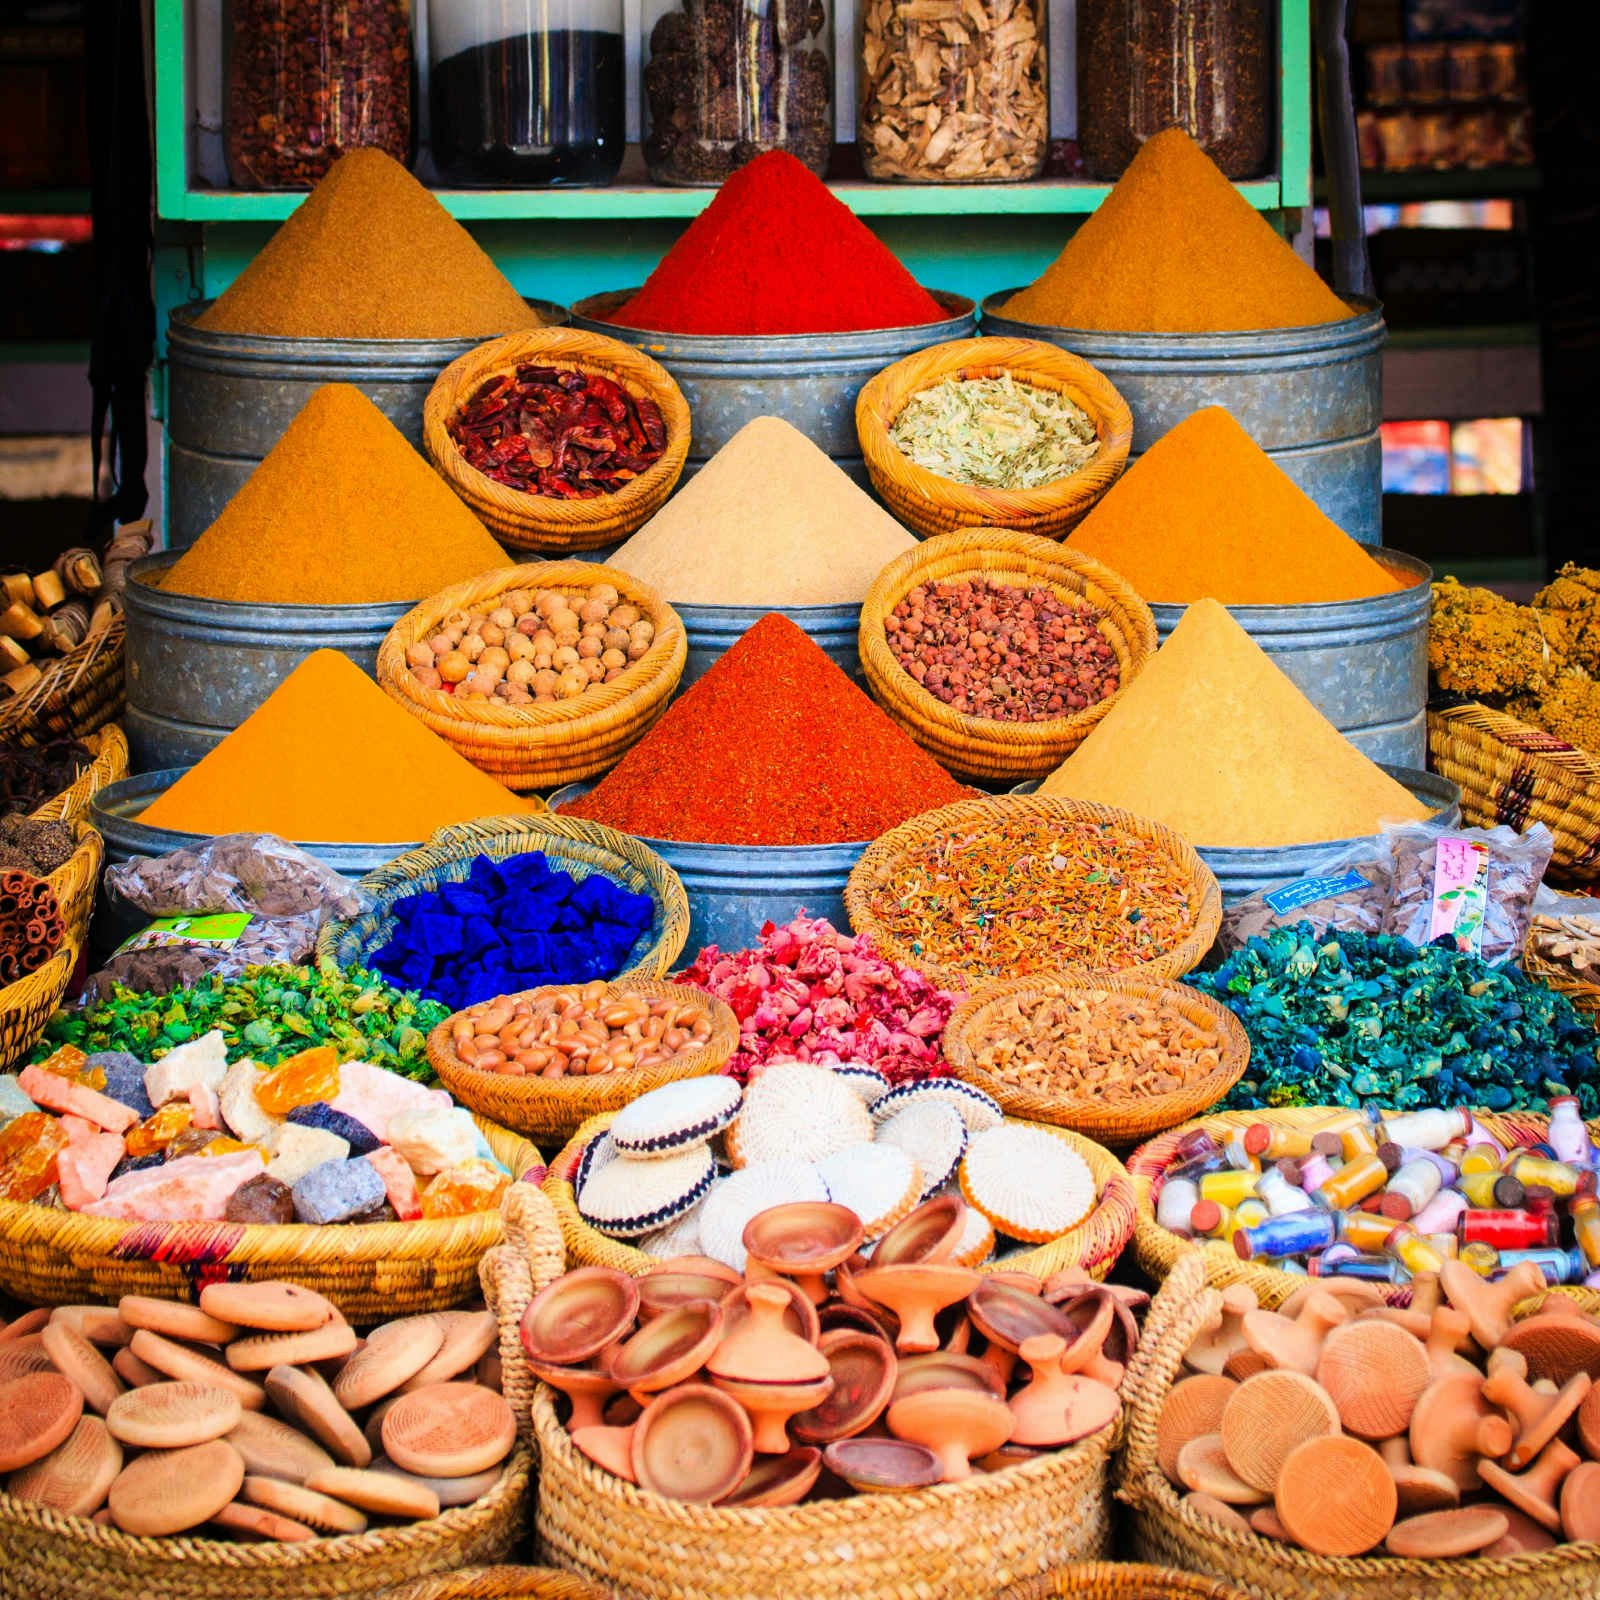 Spices and herbs arranged in colourful piles on display